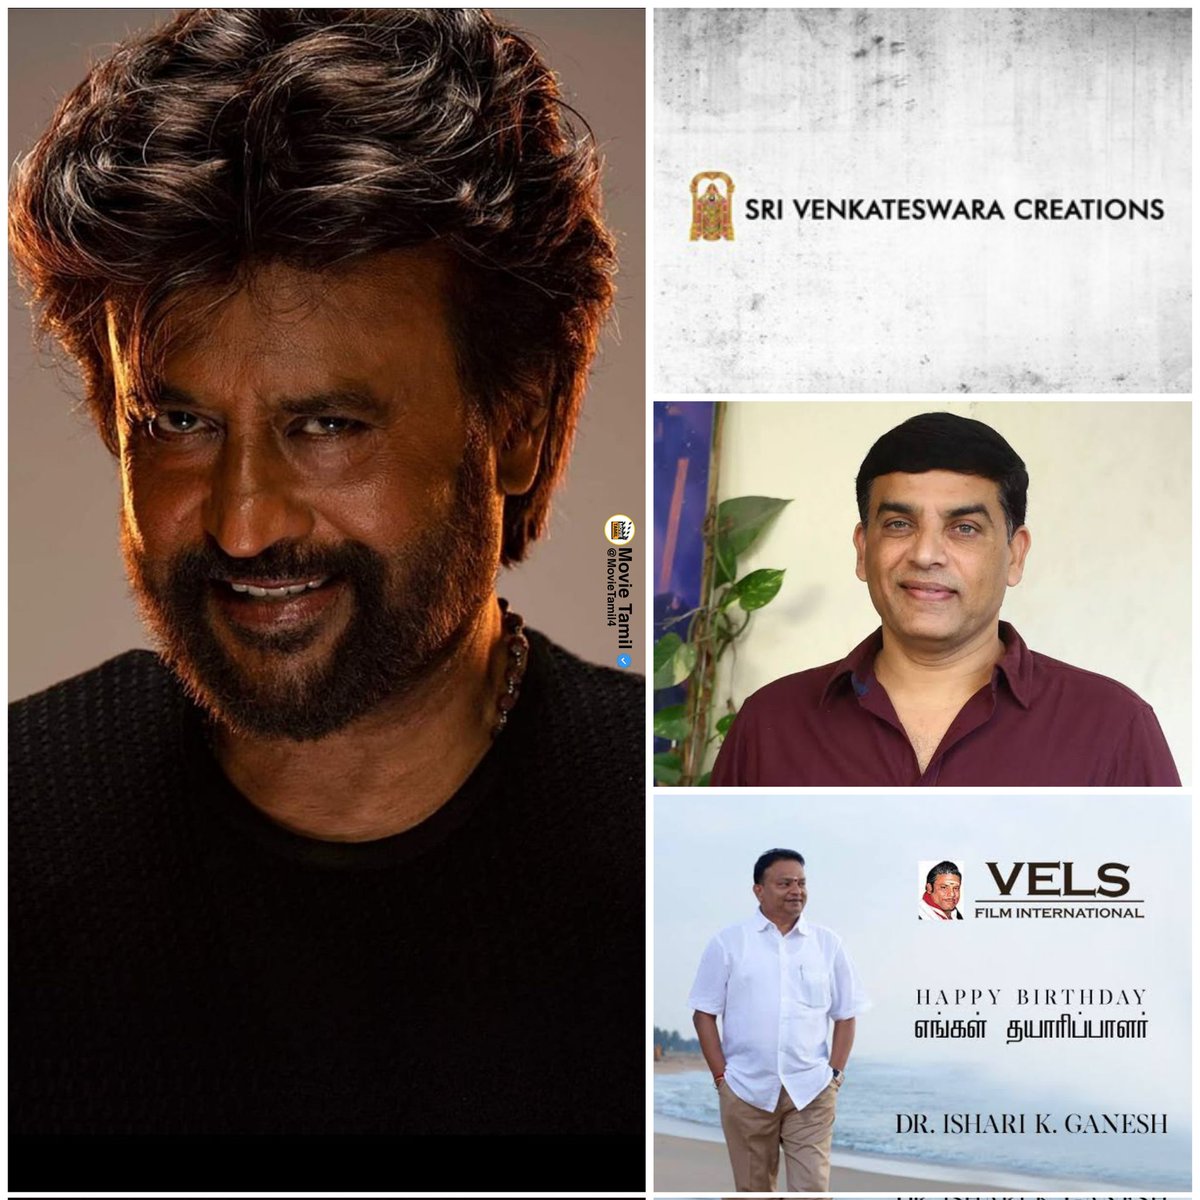 Exclusive : #Thalaivar173 or #Thalaivar174 Project 🔒

- #Rajinikanth is currently acting in #Vettiyan. #Thalaivar171 will join the shoot of after completing this.

- Next, it is reported that he has agreed to act in two films,✅
- This film is to be produced by VELS Film.…